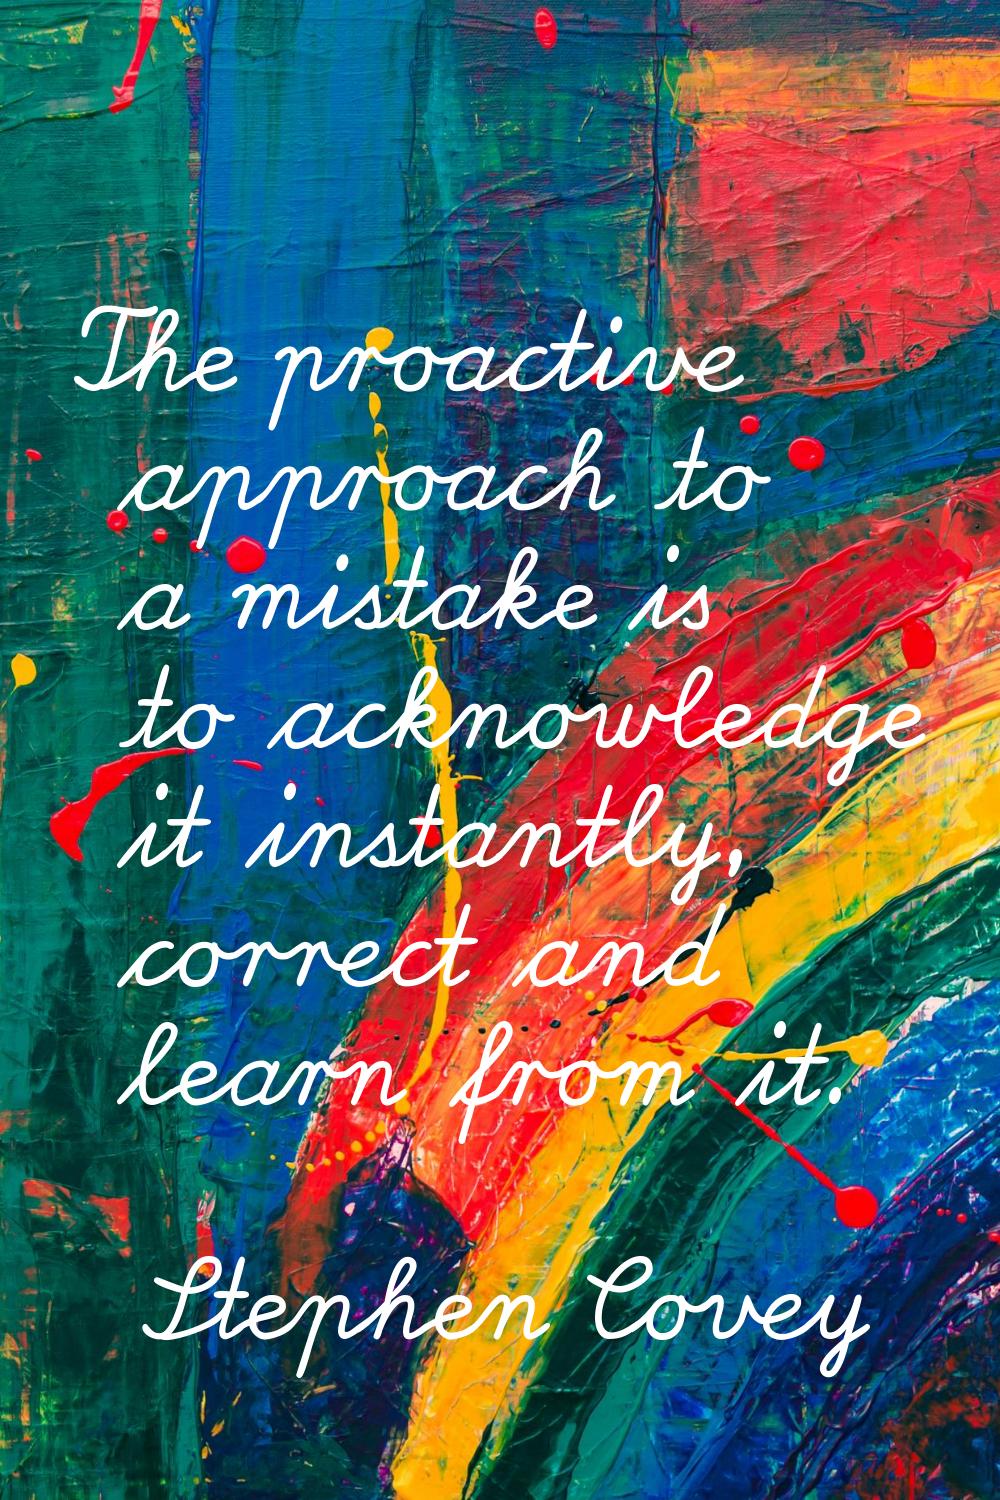 The proactive approach to a mistake is to acknowledge it instantly, correct and learn from it.